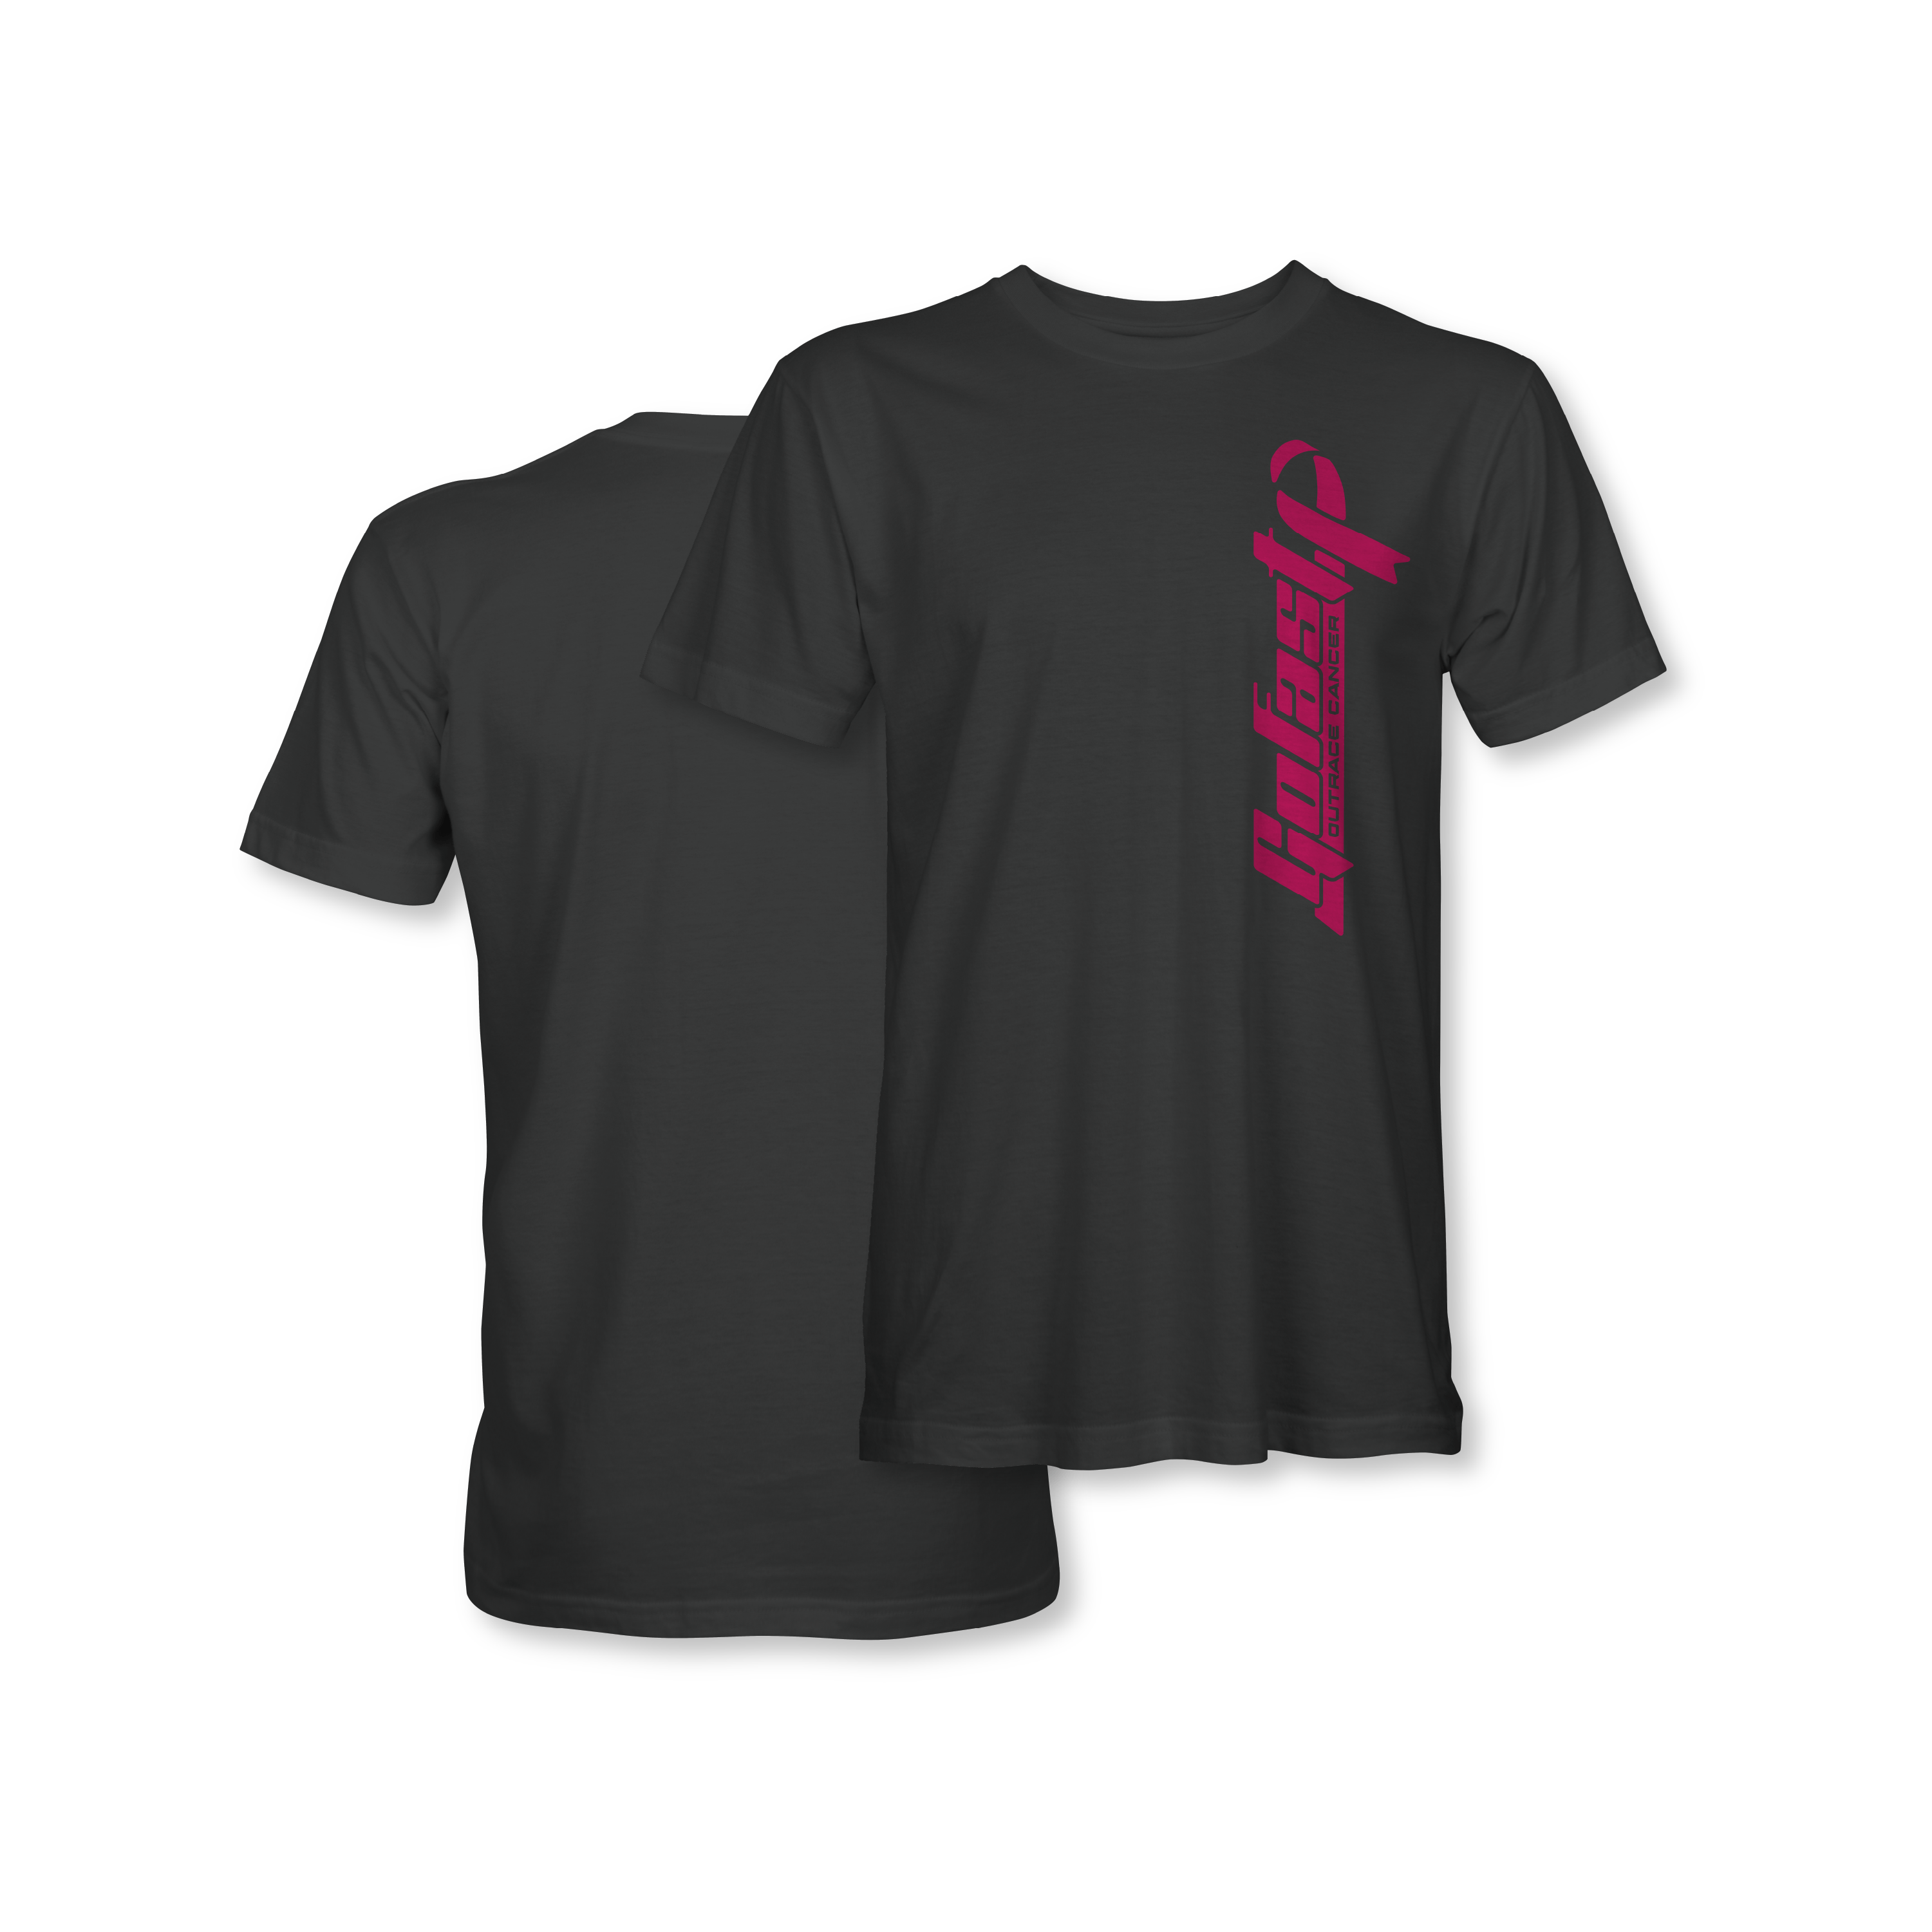 GoFast Outrace Cancer - Breast Cancer Awareness Shirt